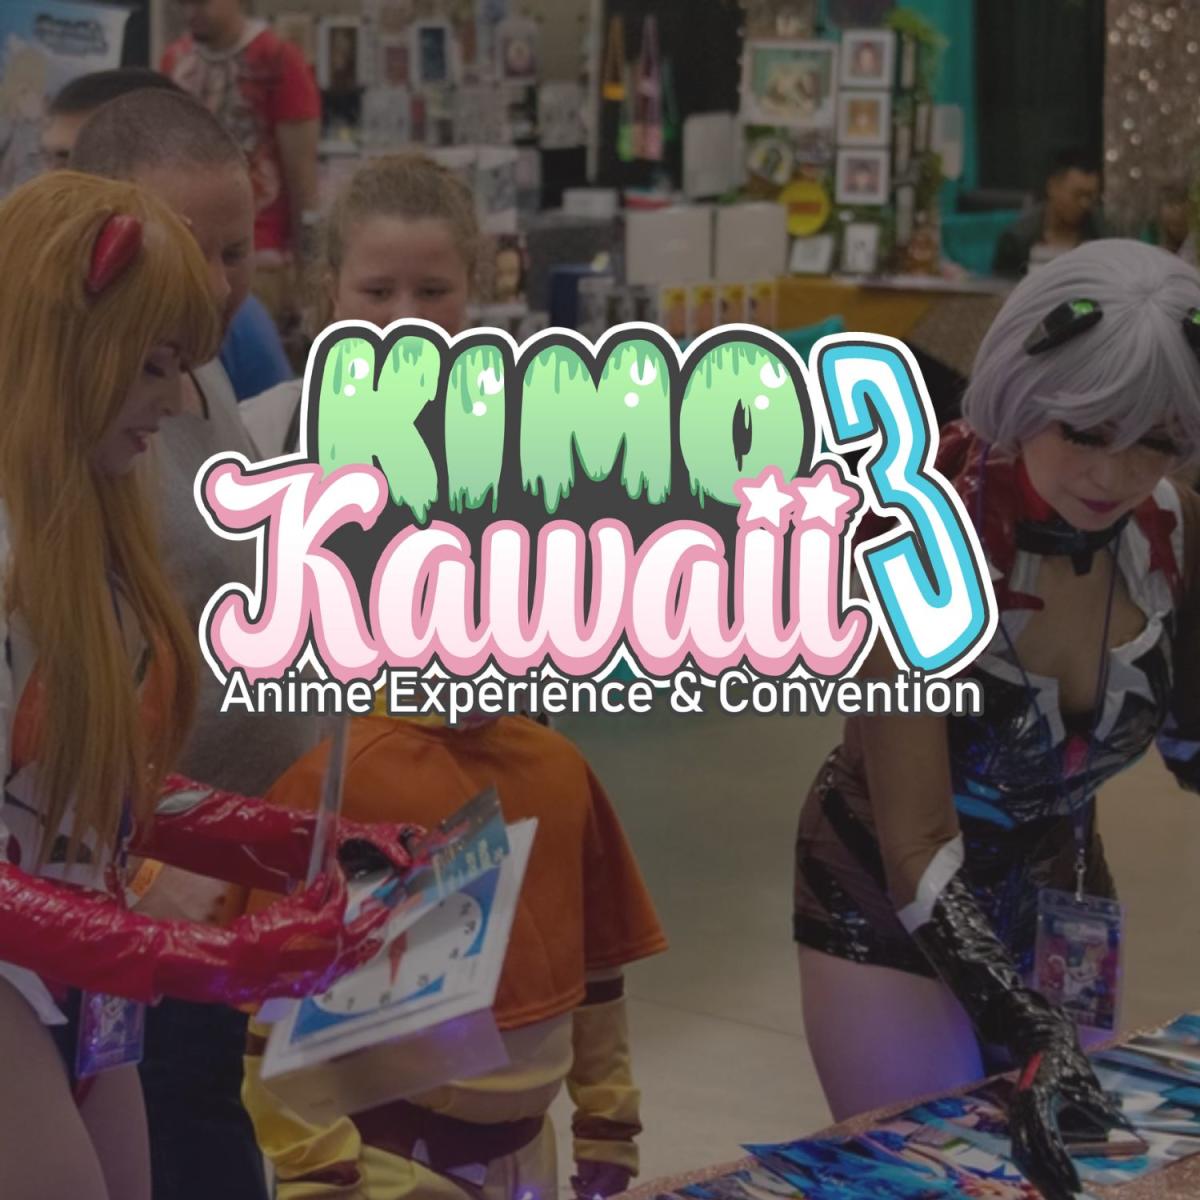 644 Anime Conventions Stock Video Footage - 4K and HD Video Clips |  Shutterstock